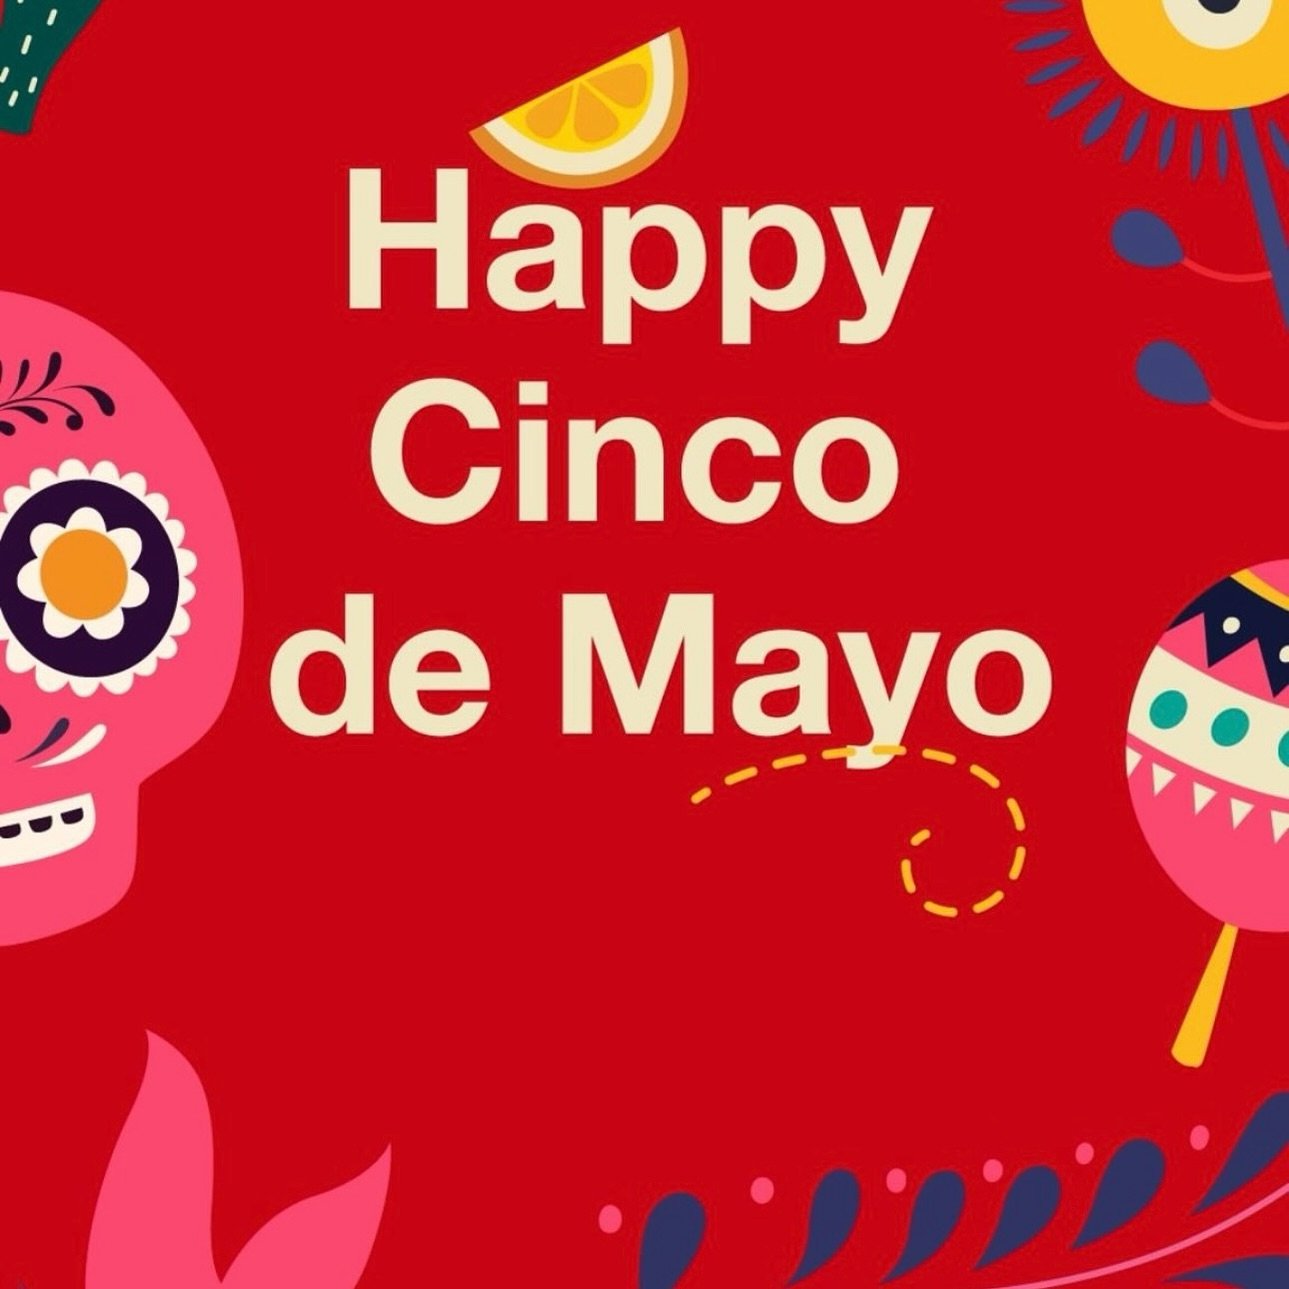 Happy Cinco de Mayo!  Celebrating A Fiesta of Culture, History, and Unity

Cinco de Mayo, is a vibrant joyous occasion that holds special significance for many people, both within and beyond Mexico.

At its core, Cinco de Mayo is a celebration of res